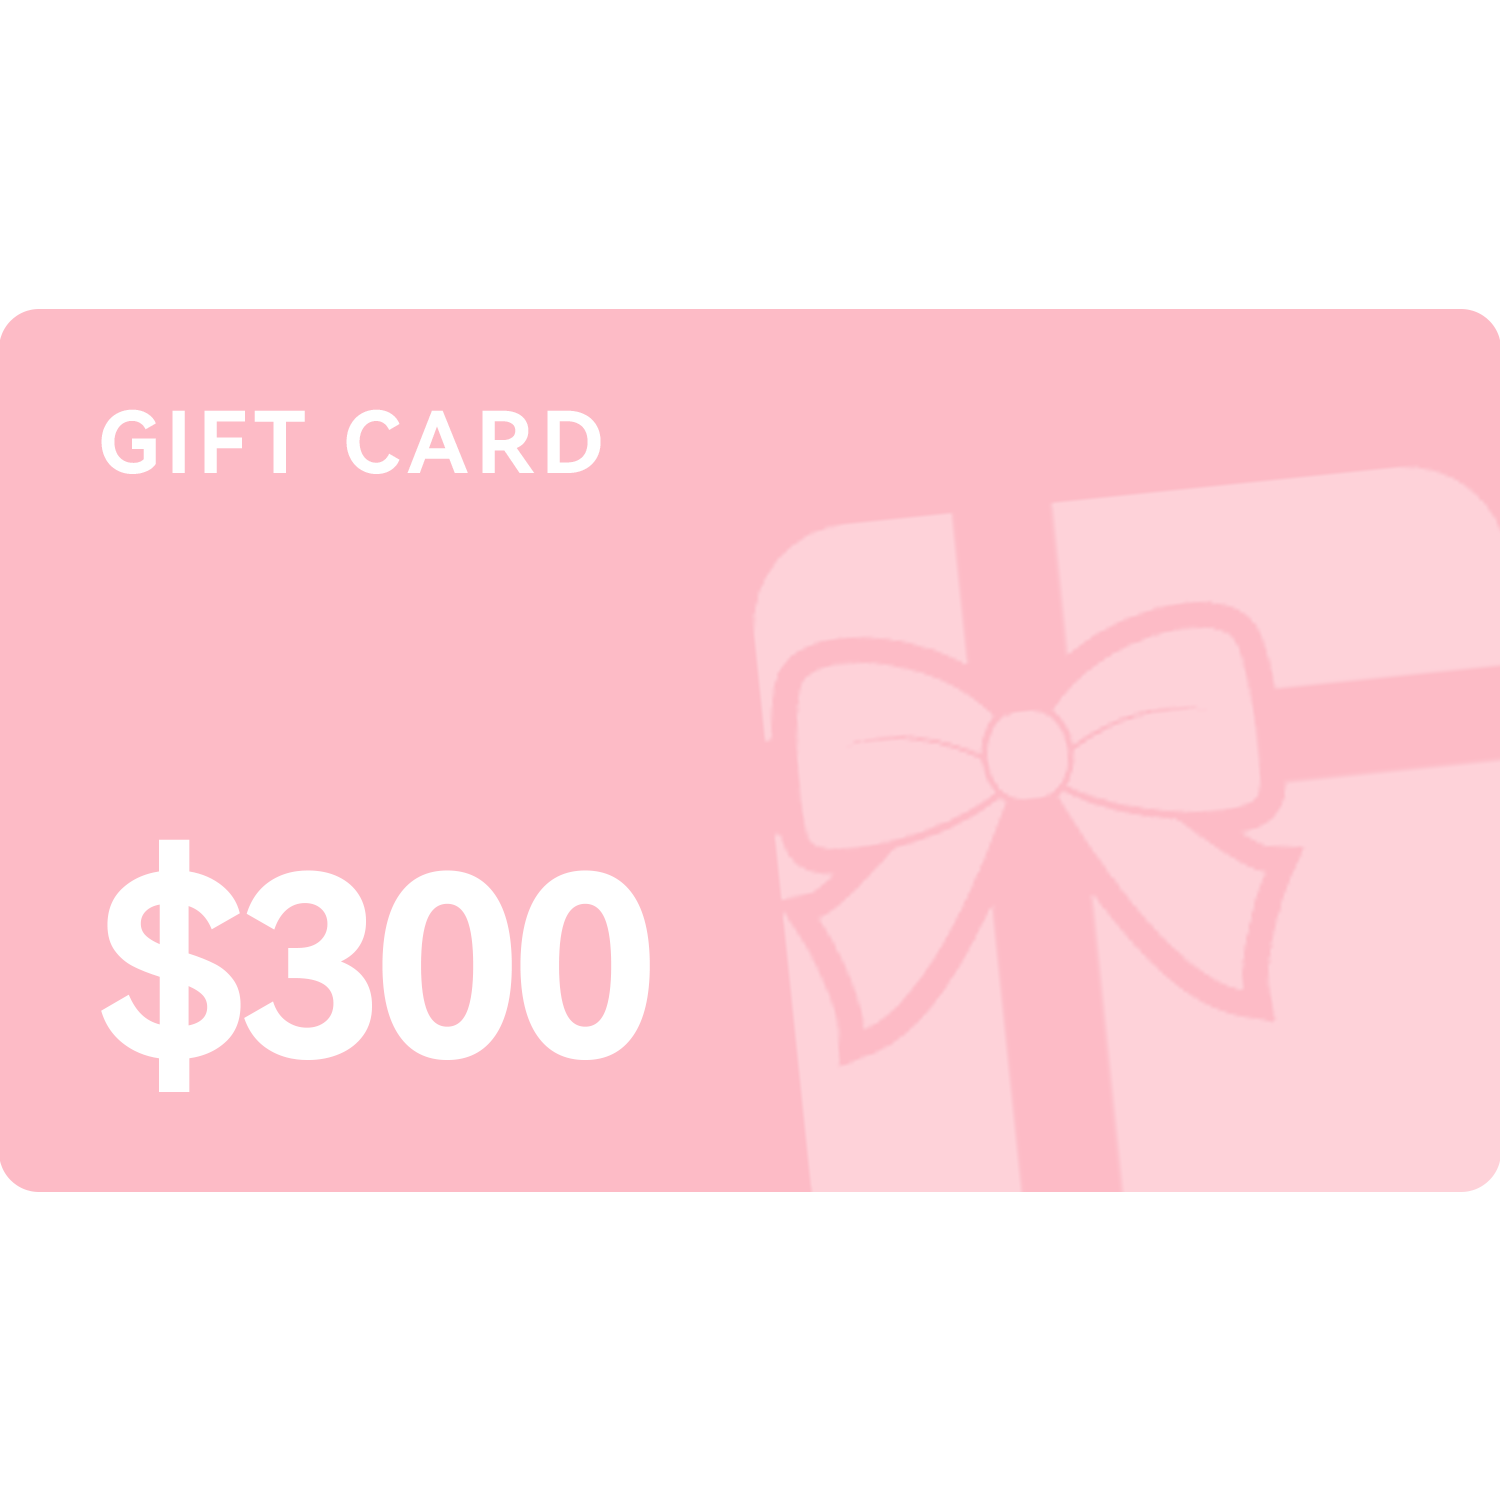 Arrtx Gift Cards from $10- $300 for Online Art Supplies Shopping